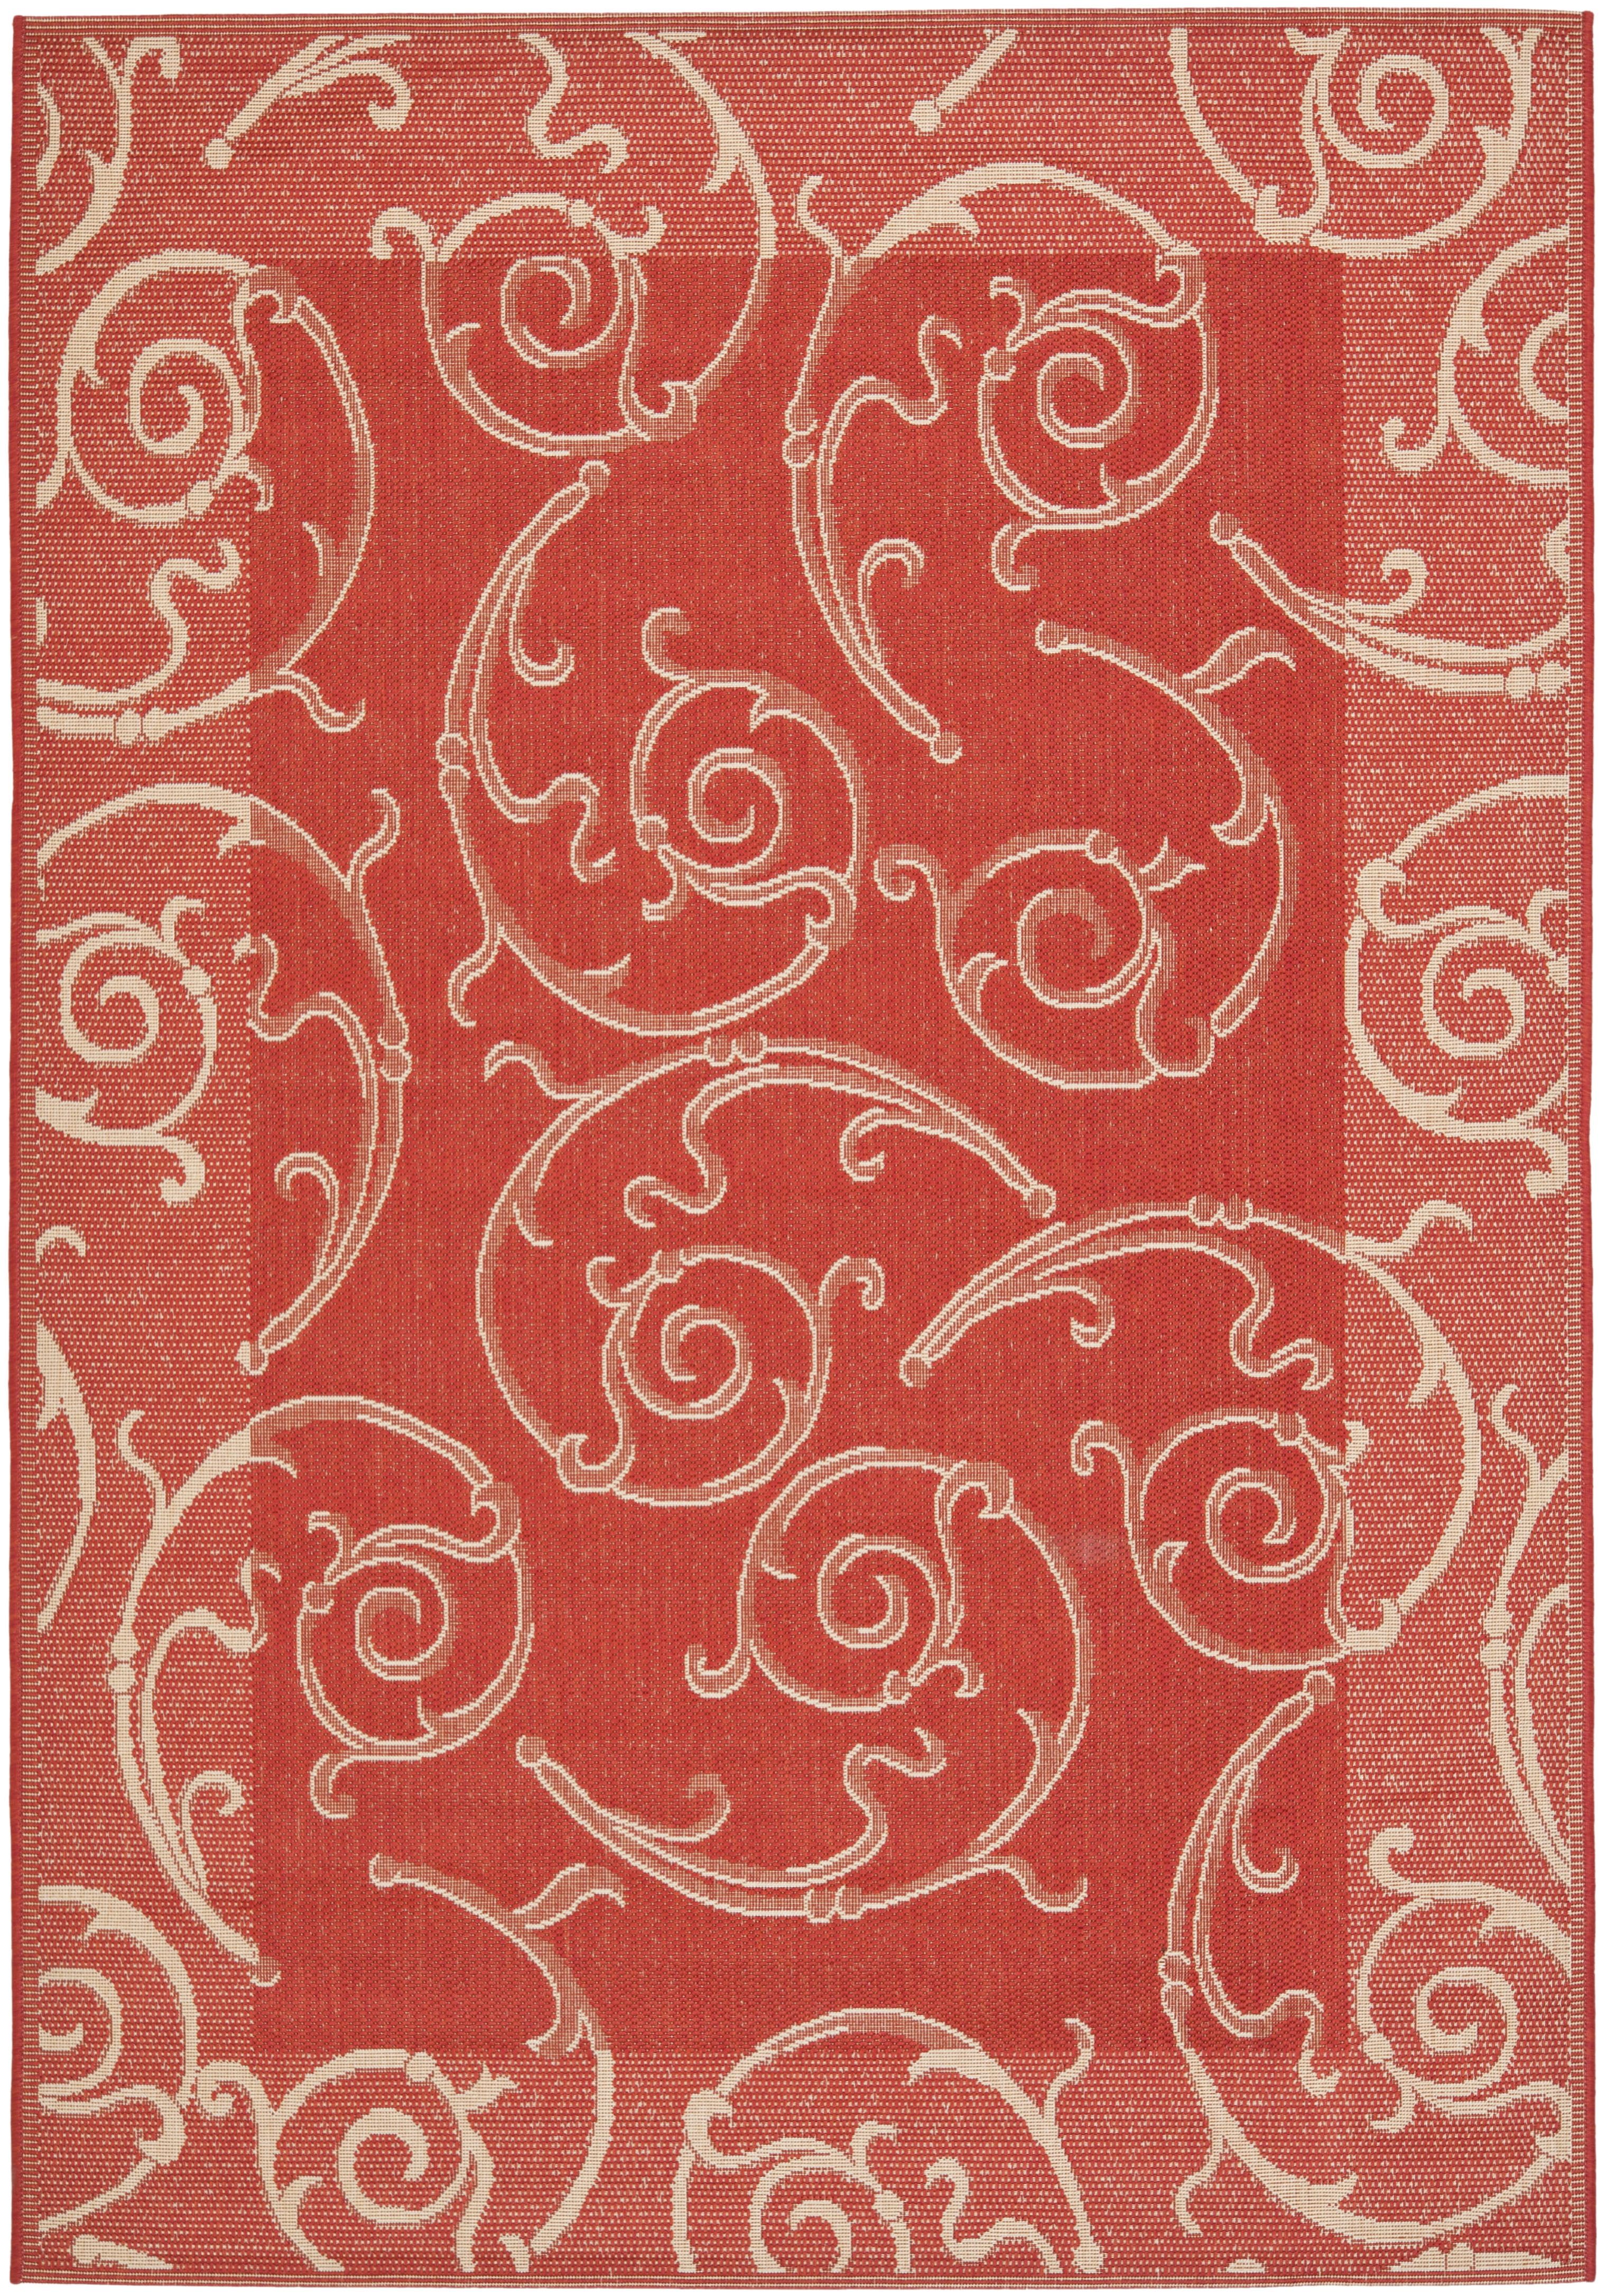 Vibrant Red and Natural Rectangular Easy-Care Outdoor Rug, 4' x 5'7"